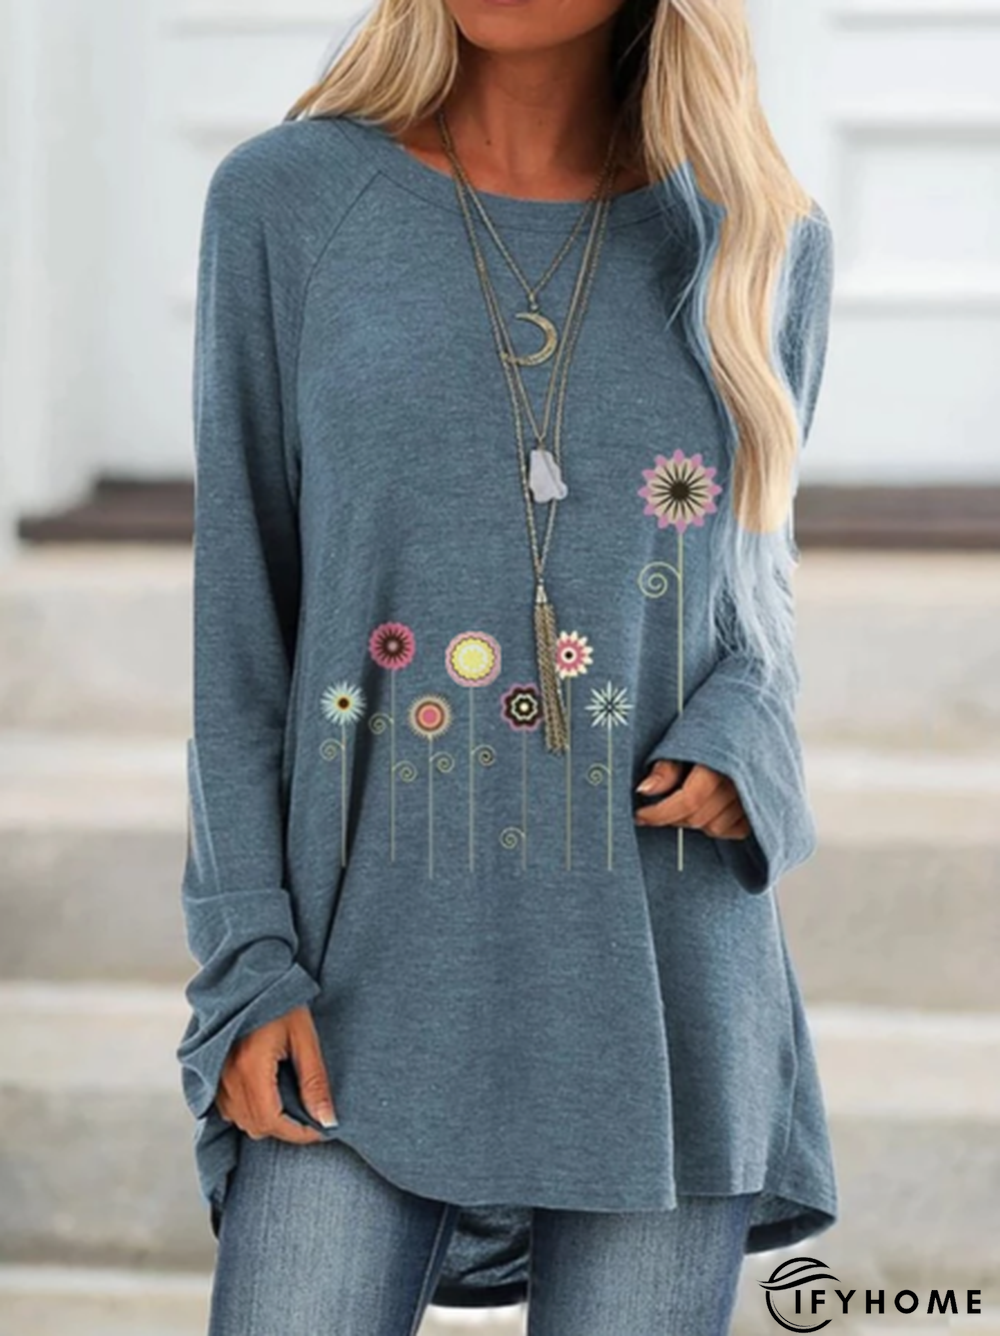 Casual Floral Crew Neck Long Sleeve Top Tunics | IFYHOME